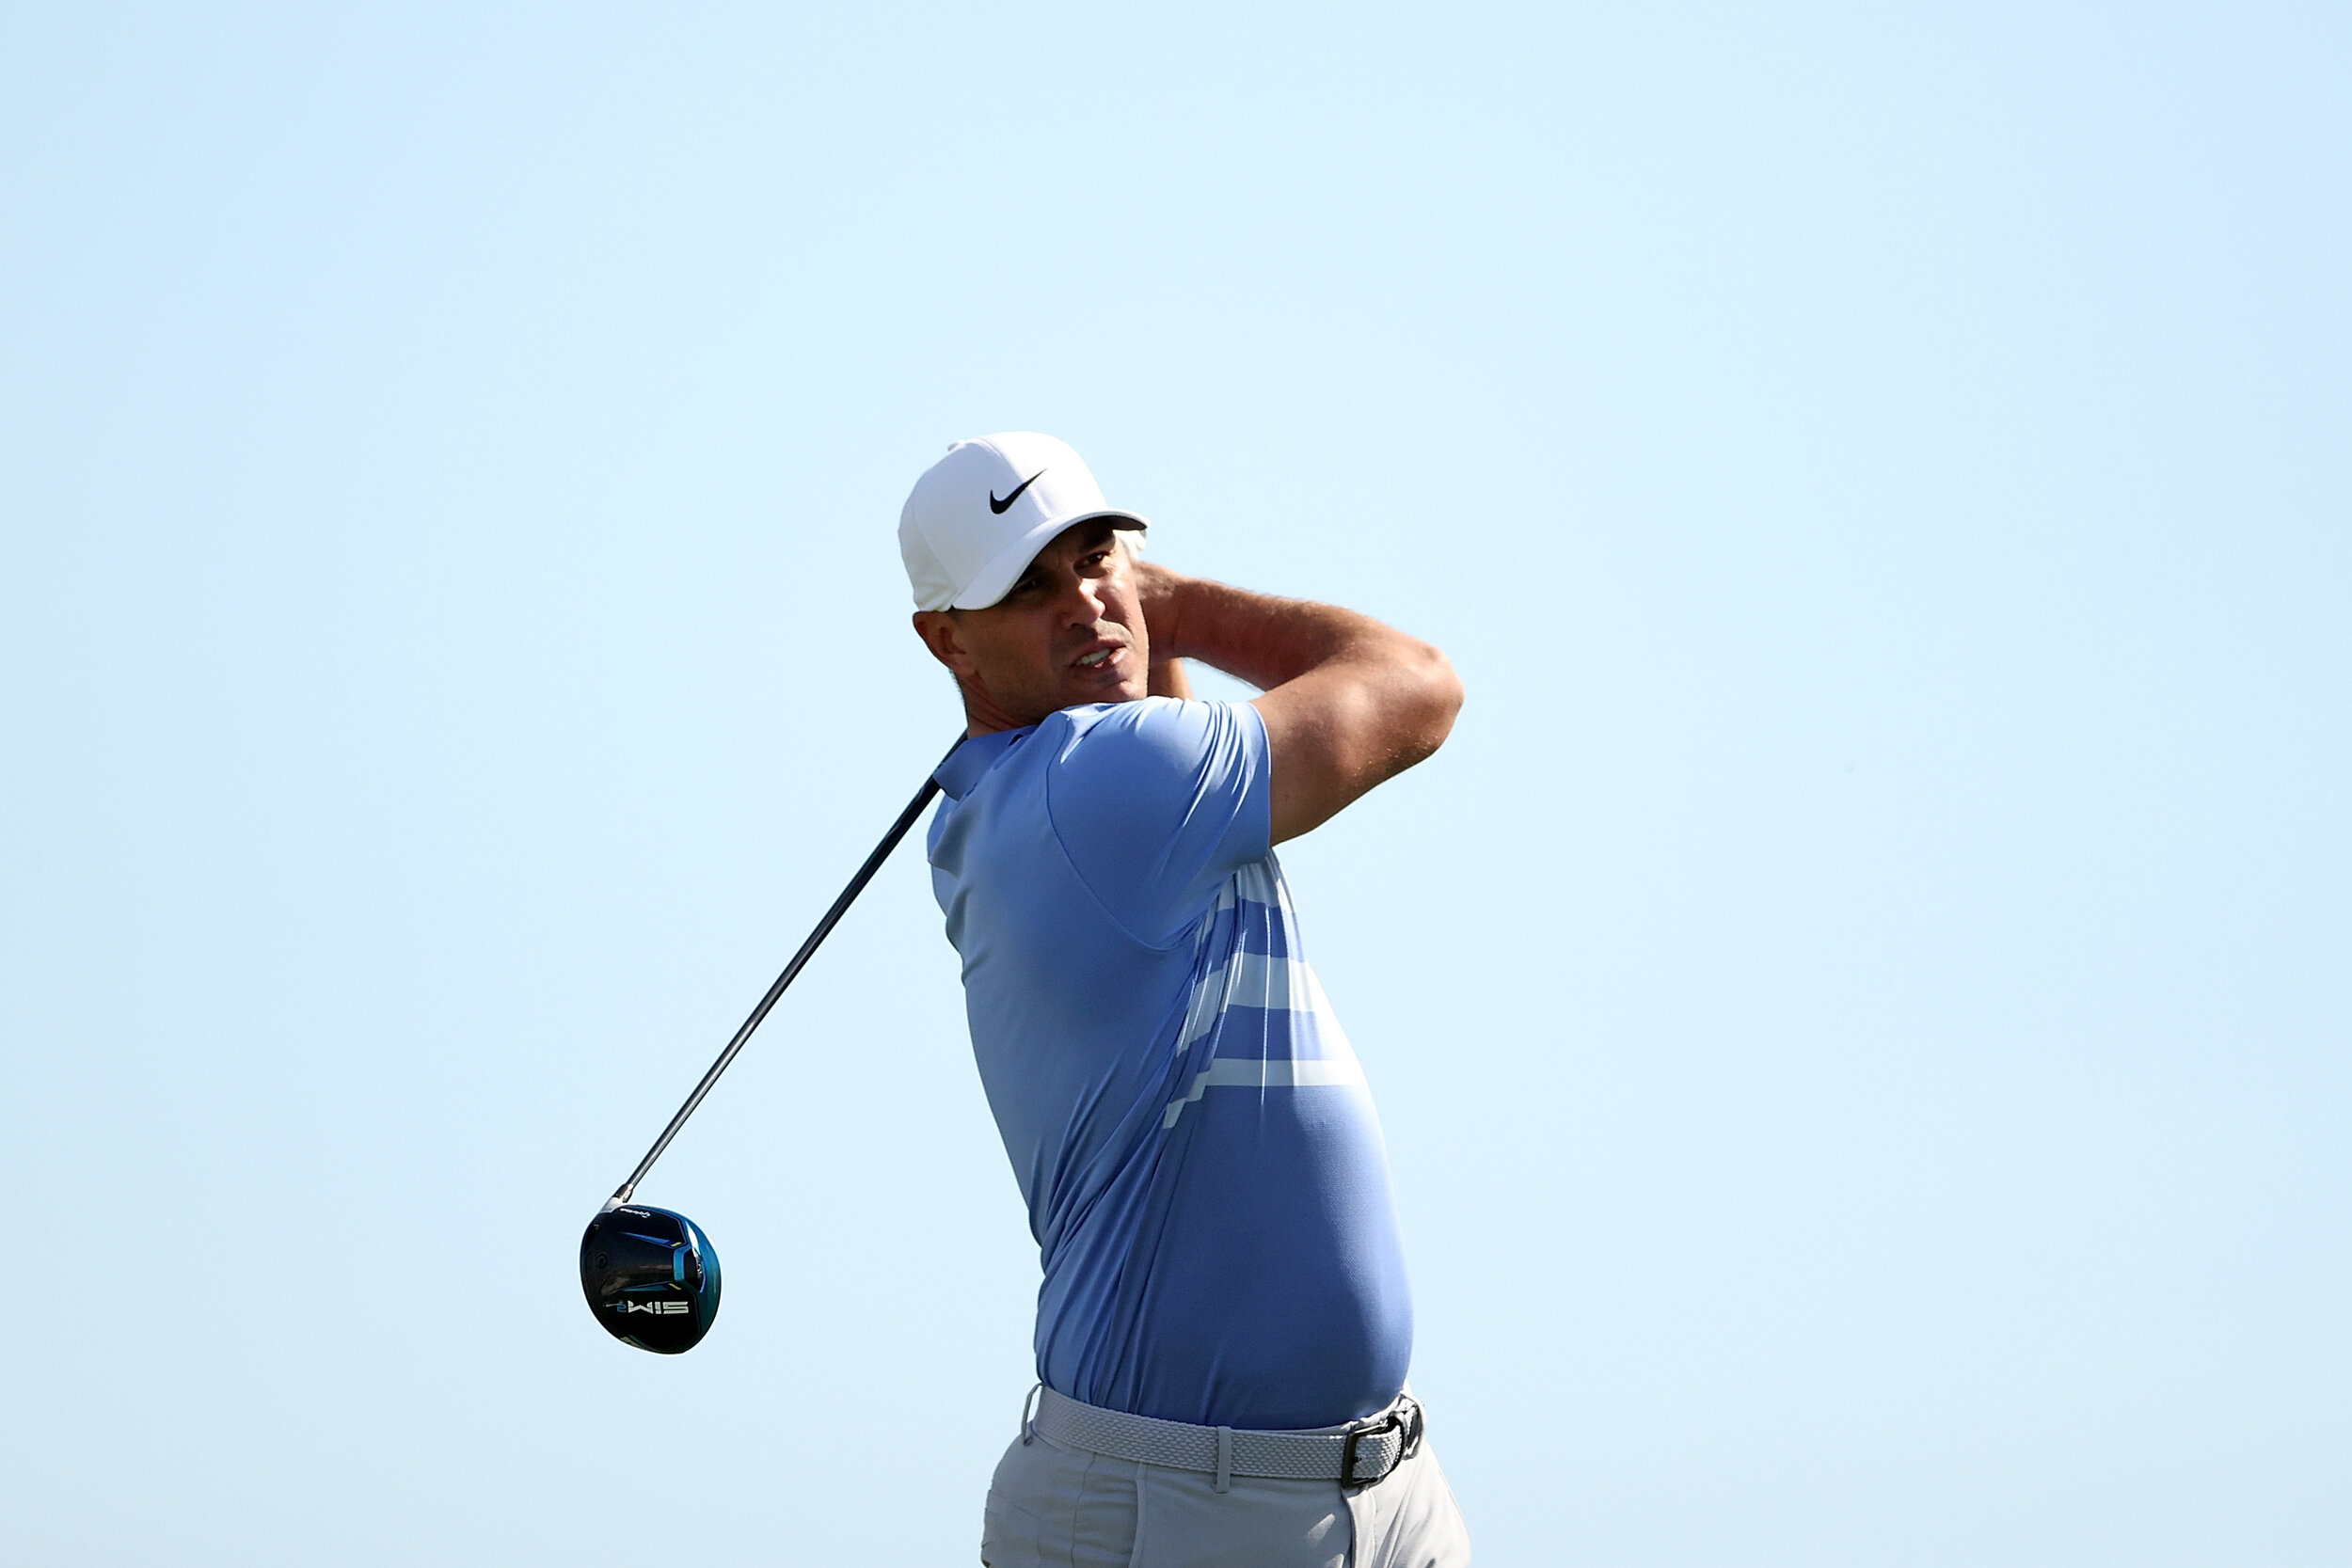  SCOTTSDALE, ARIZONA - FEBRUARY 07: Brooks Koepka of the United States hits his tee shot on the 11th hole during the final round of the Waste Management Phoenix Open at TPC Scottsdale on February 07, 2021 in Scottsdale, Arizona. (Photo by Abbie Parr/